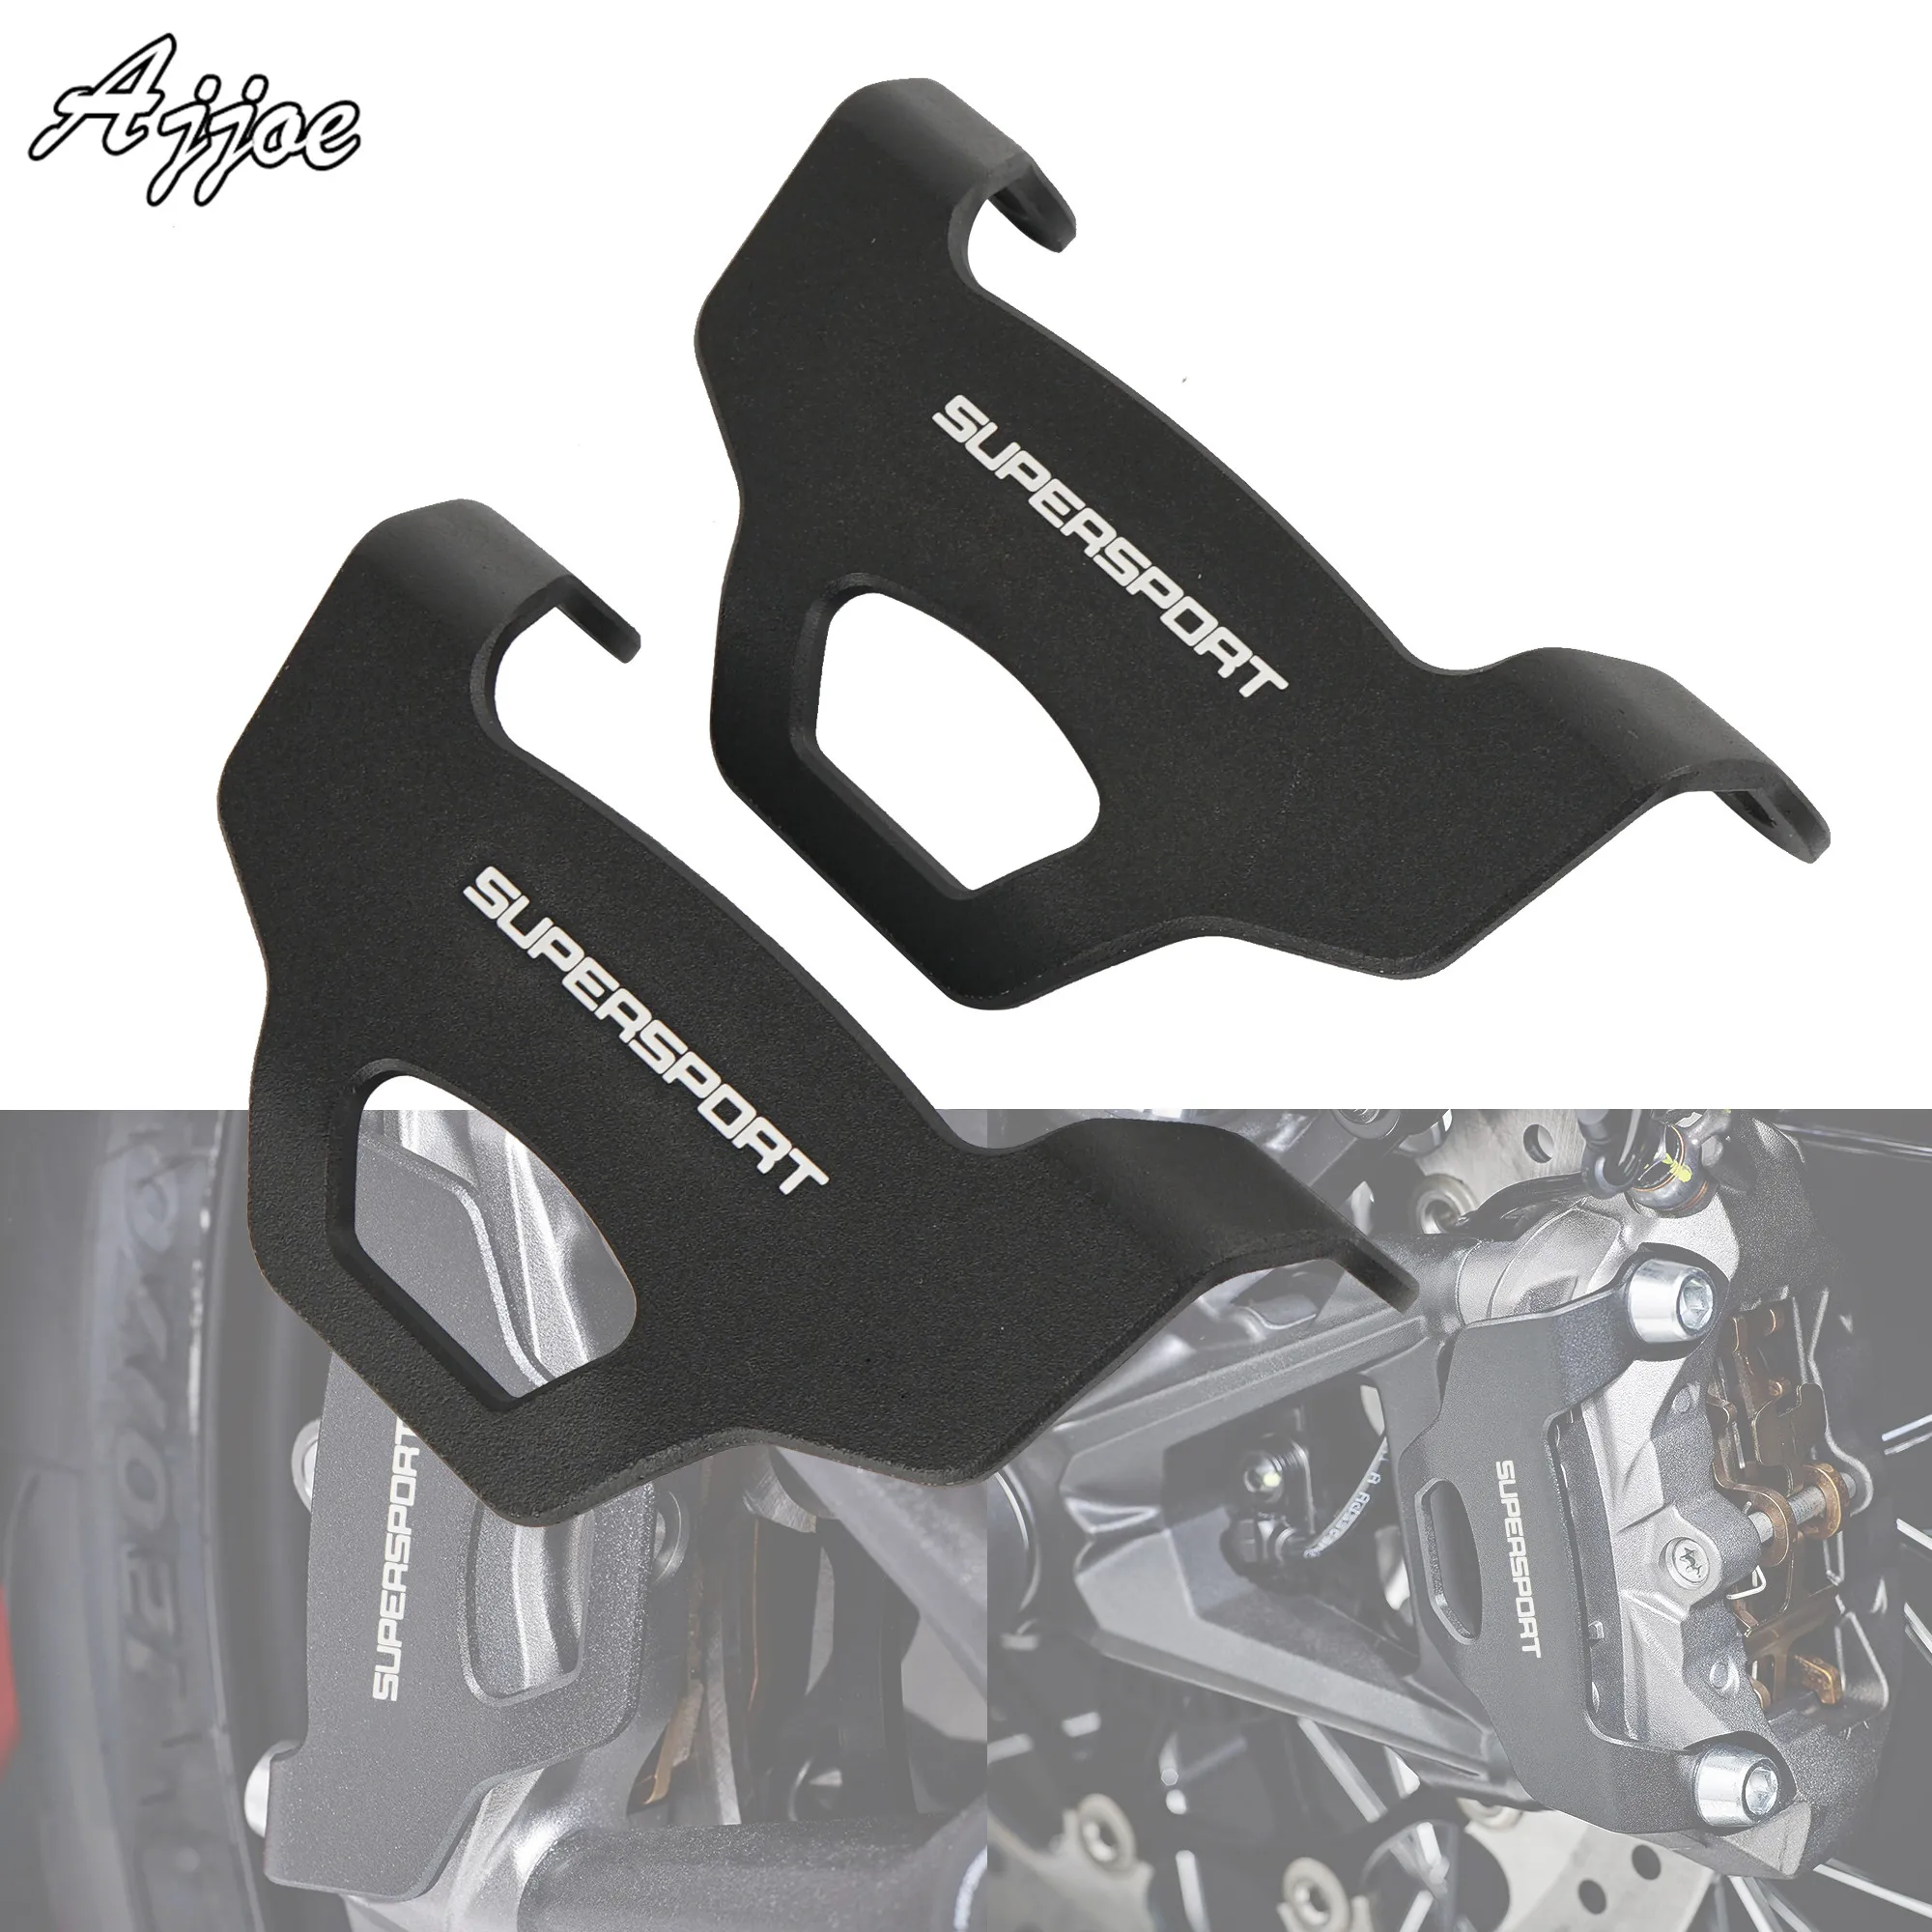 

Motocycle Front Brake Caliper Guard Cover for DUCATI Supersport 939 2017 2018 2019 2020 2021 2022 2023